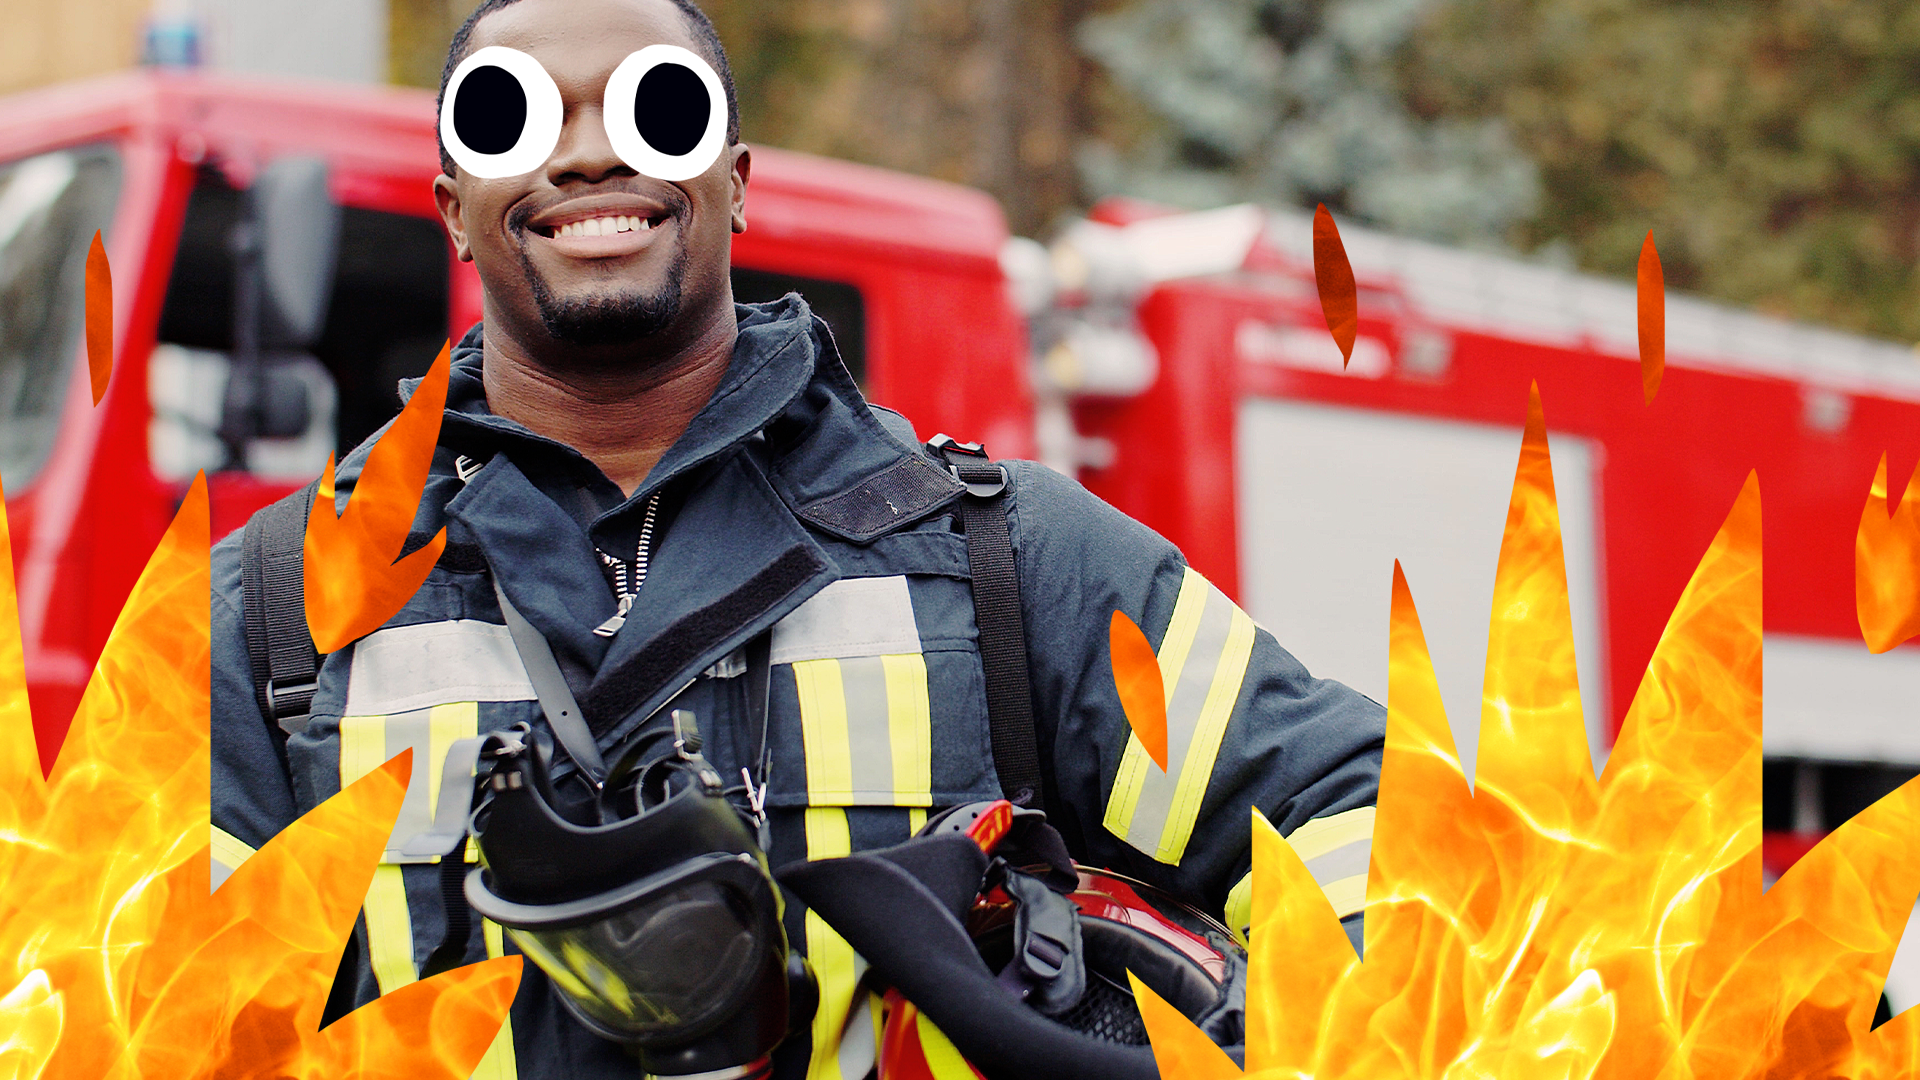 A fireman surrounded by cartoon fire